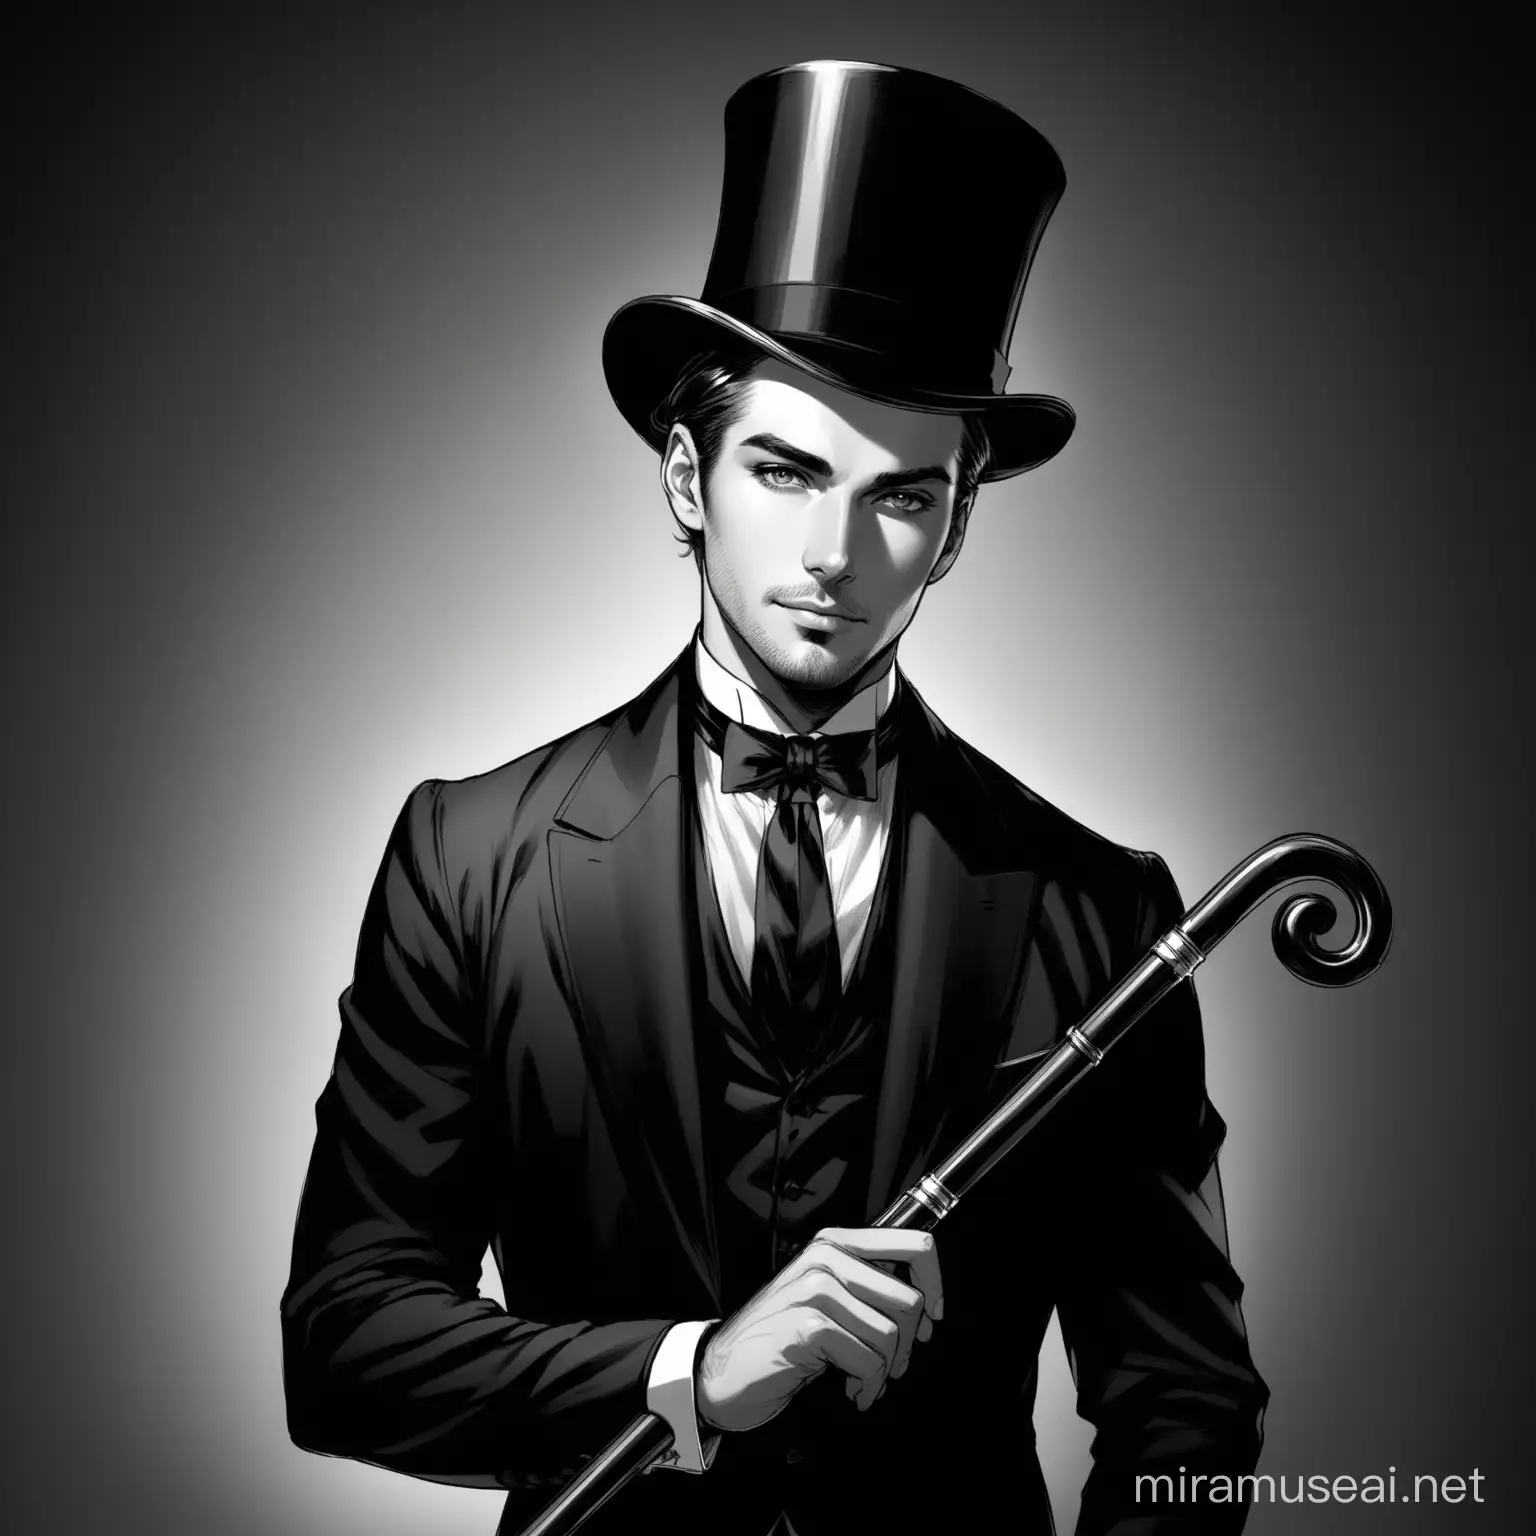 Stylish Gentleman in Vintage Attire with Cane and Top Hat